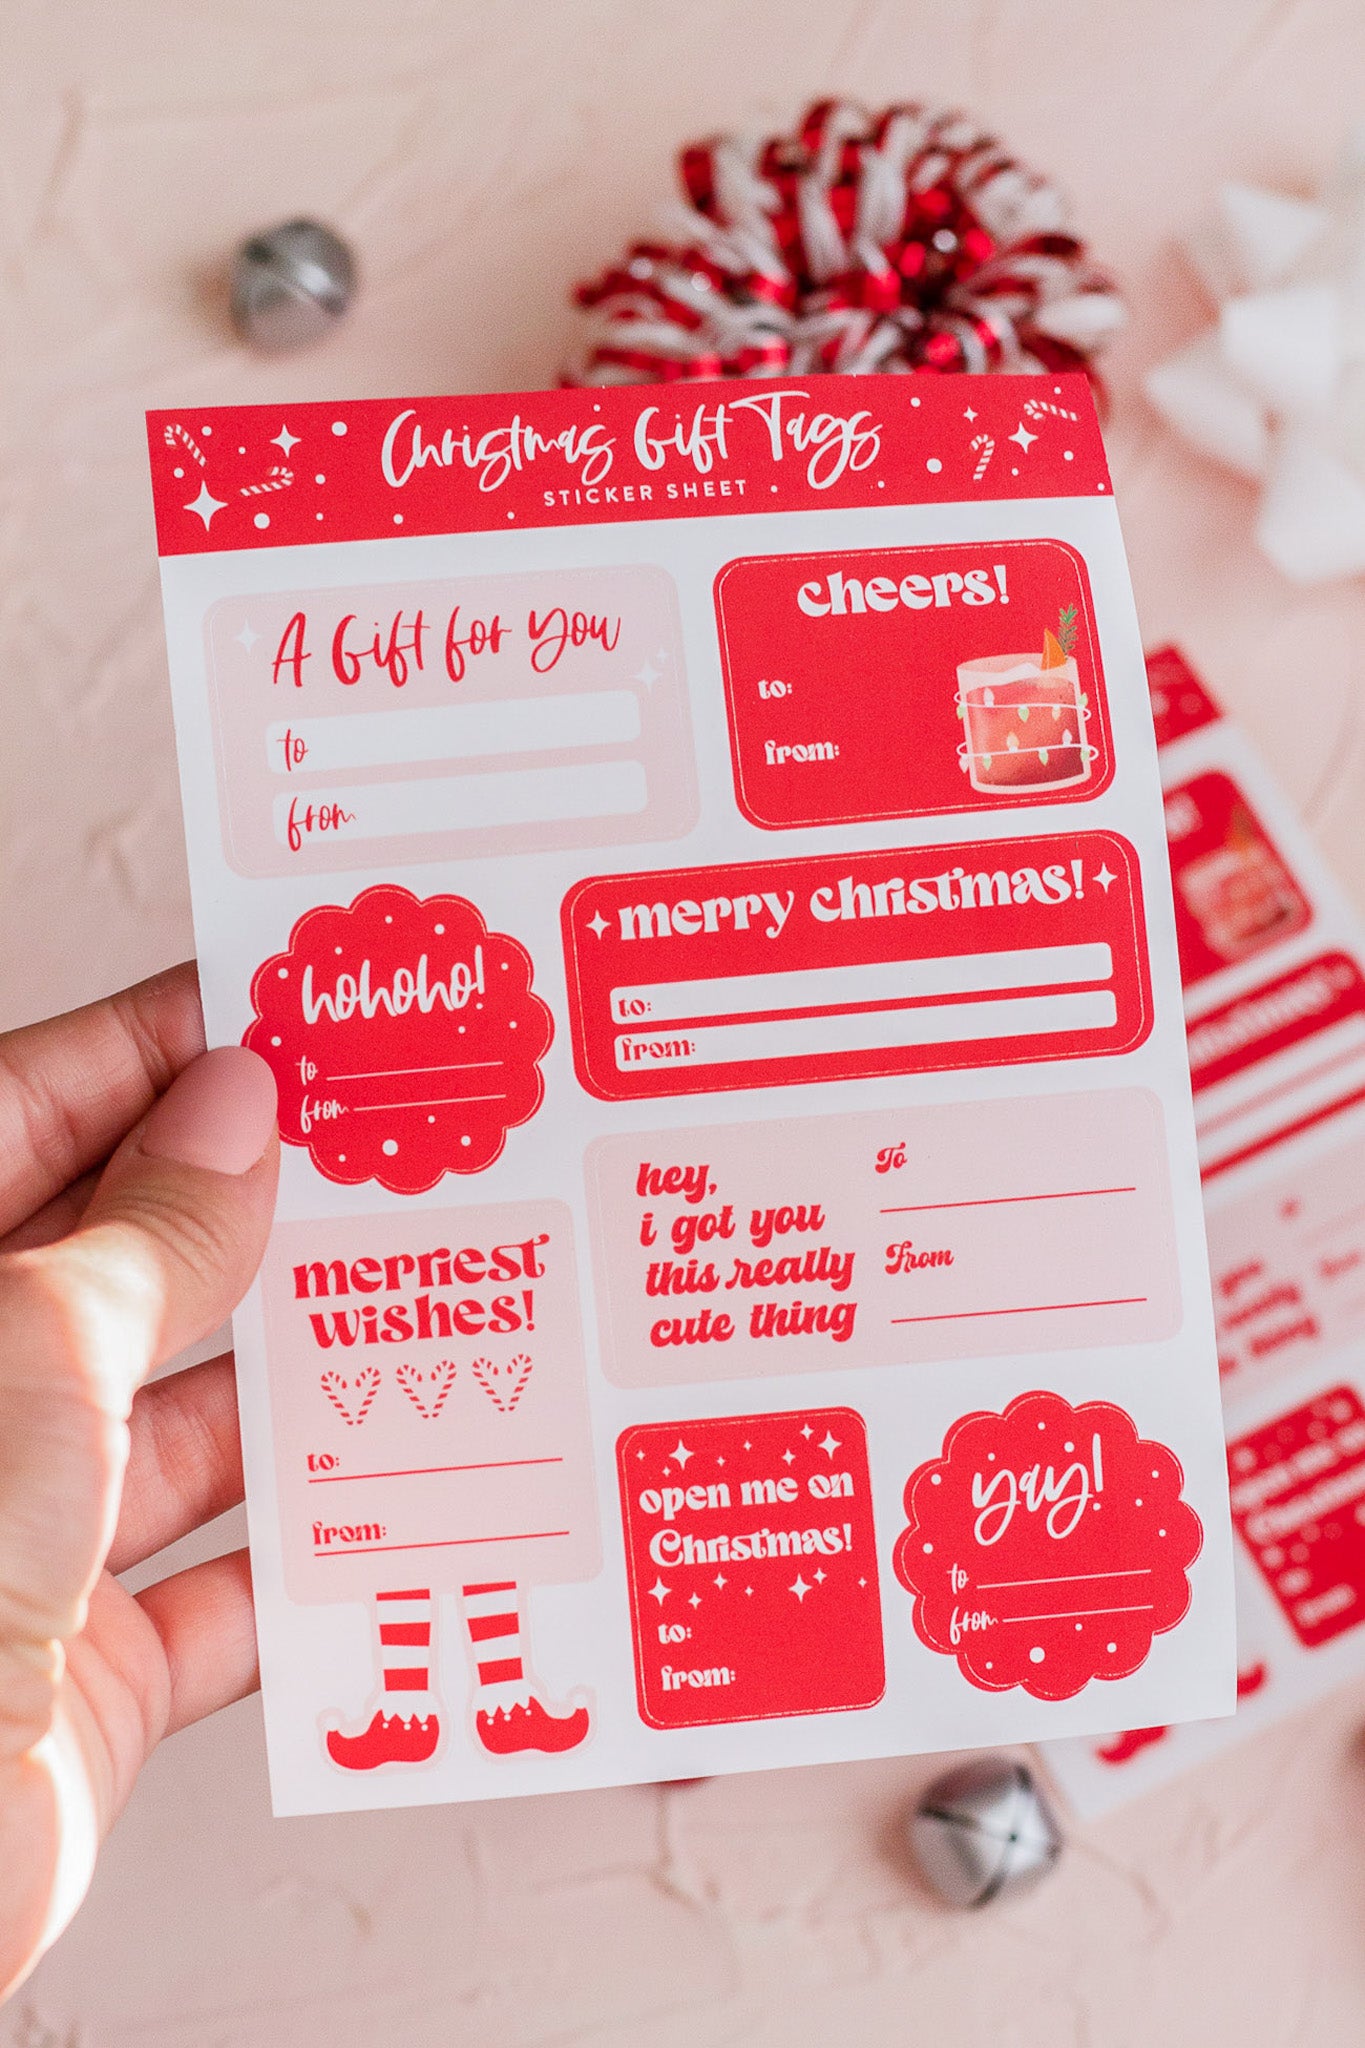 Load image into Gallery viewer, Christmas Gift Tags Sticker Sheet
